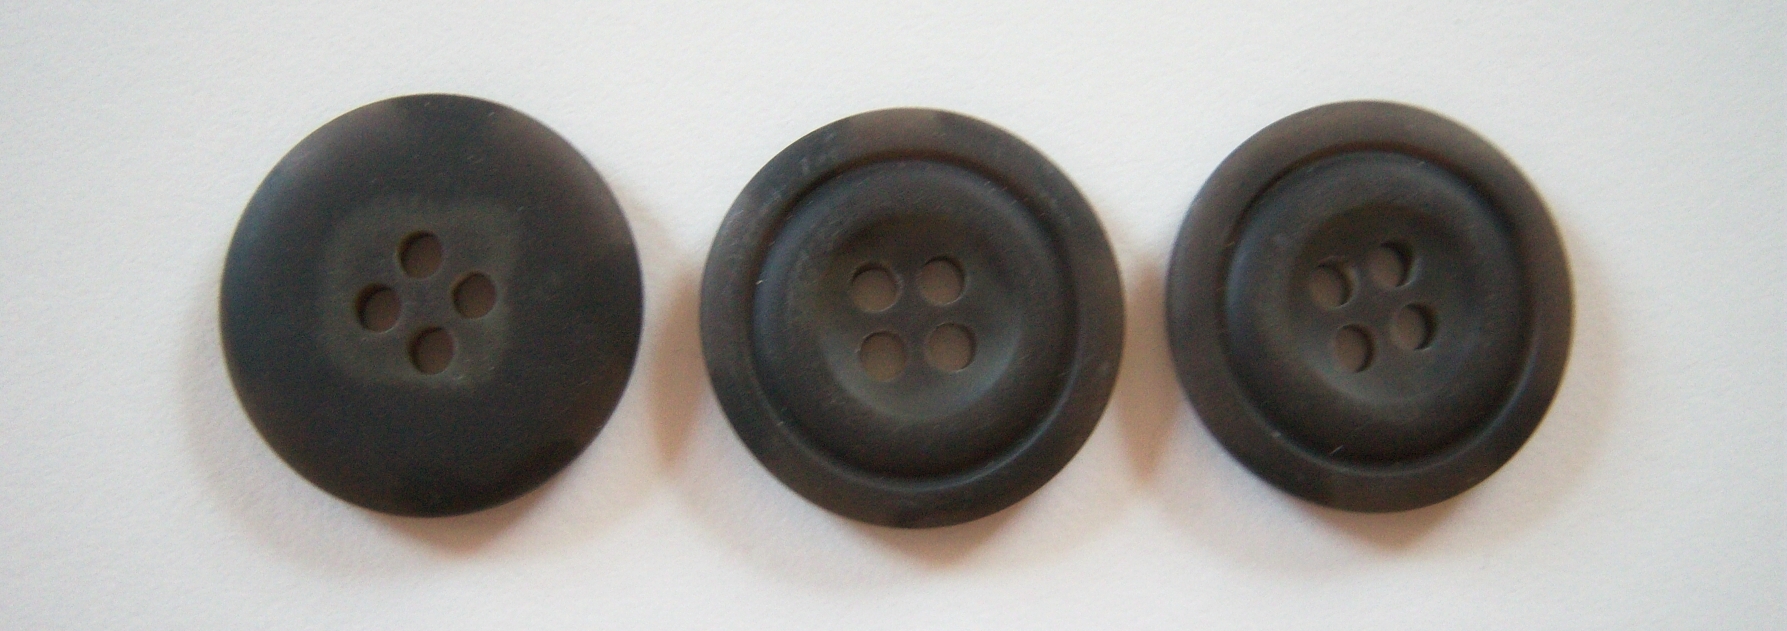 Taupe/Grey 3/4" 2 Hole Button